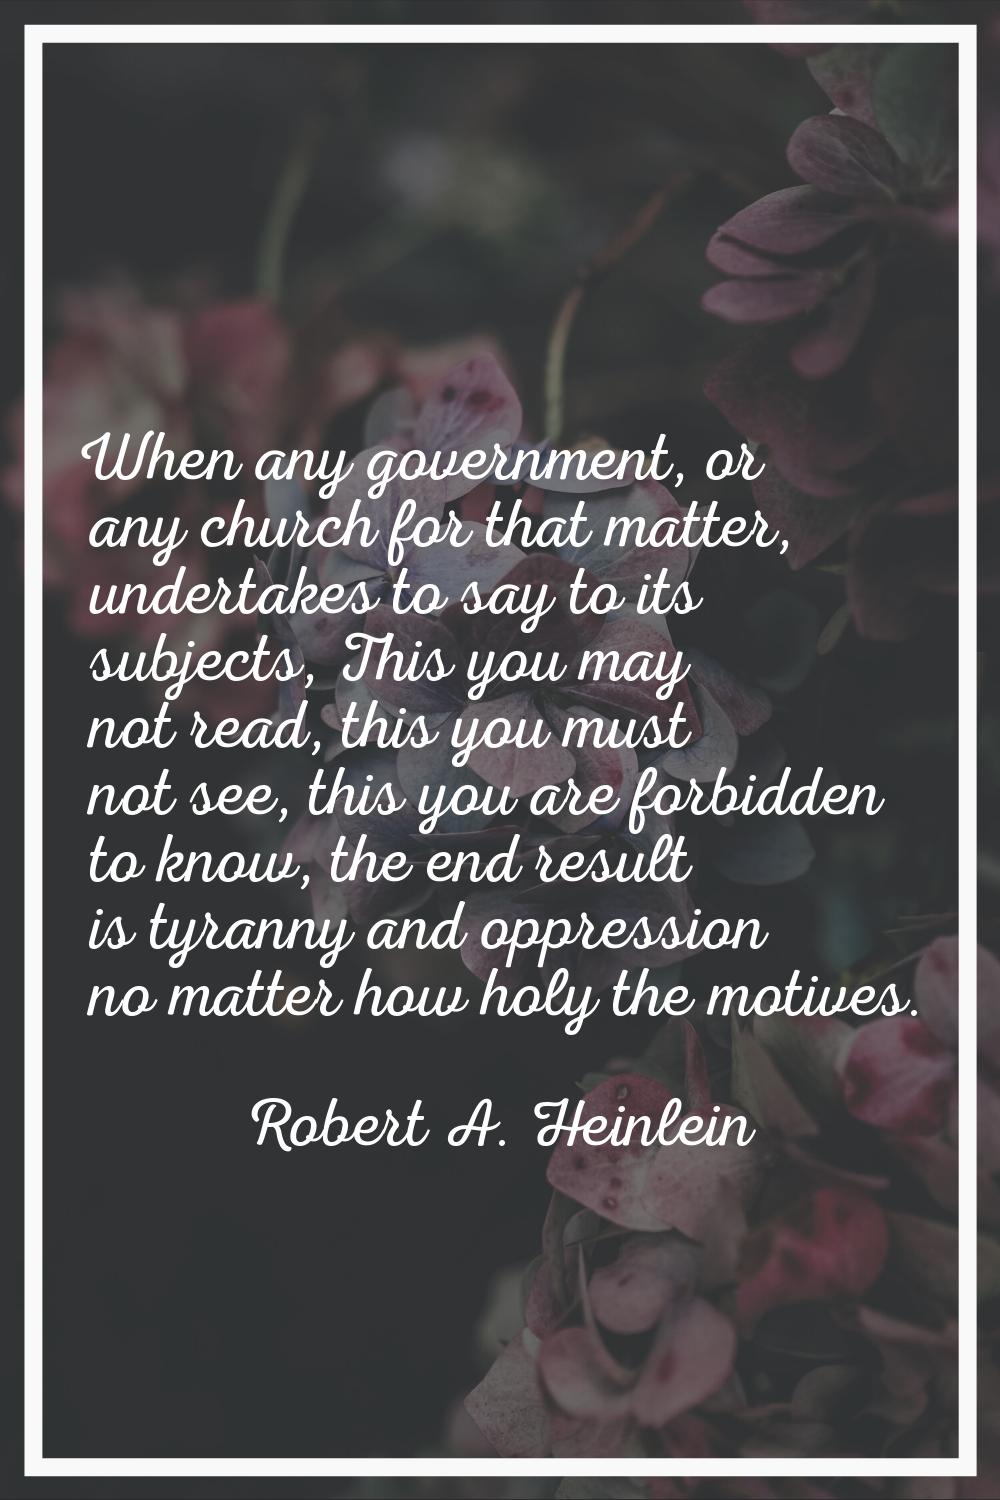 When any government, or any church for that matter, undertakes to say to its subjects, This you may